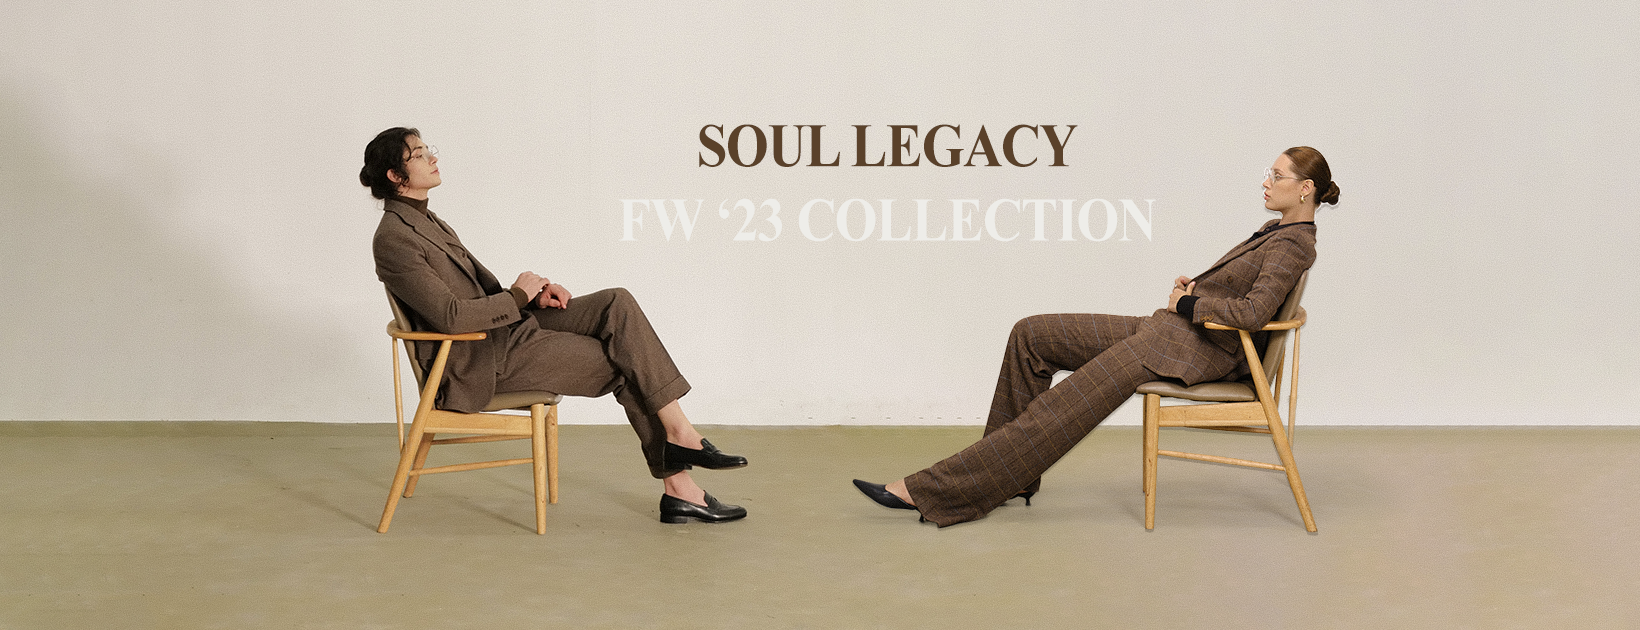 Fall Winter 23' Ready to Wear Collection